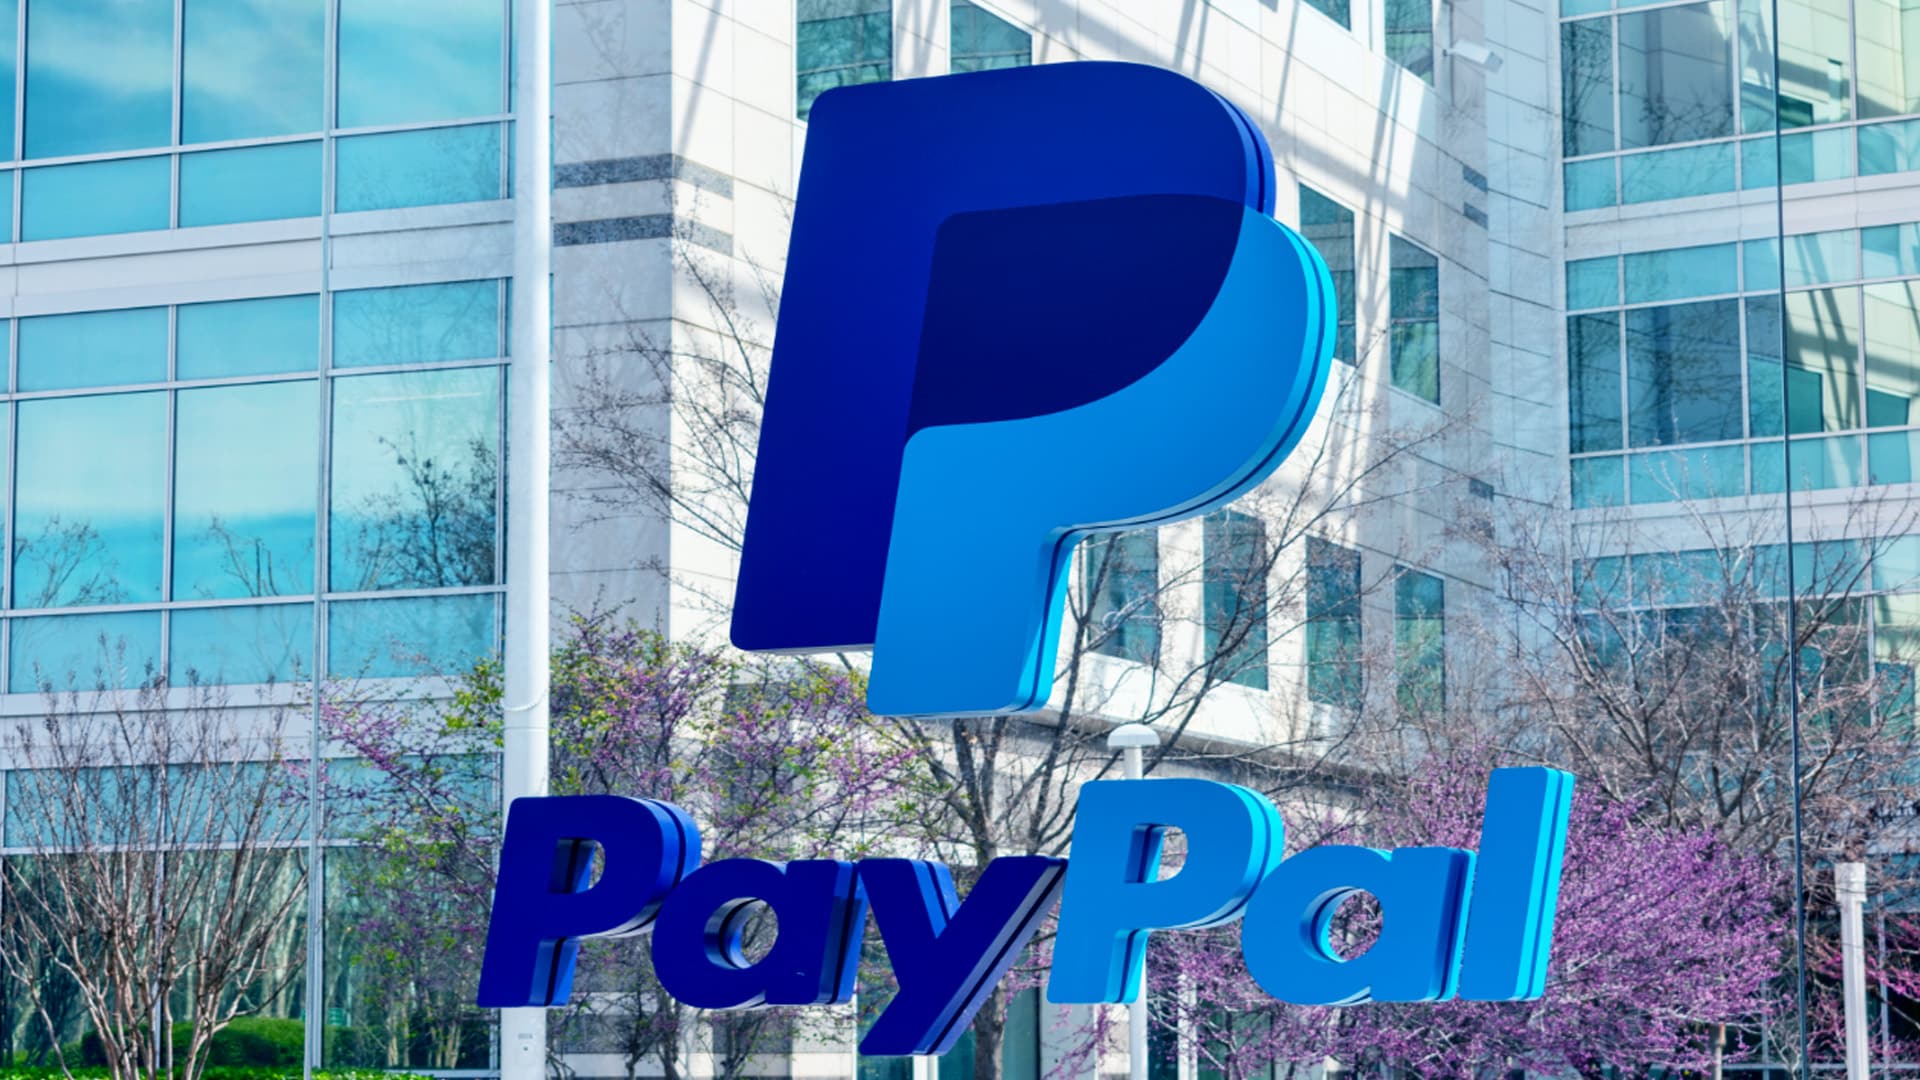 Blockchain tech can democratise financial services and make financial inclusion possible, says PayPal CTO